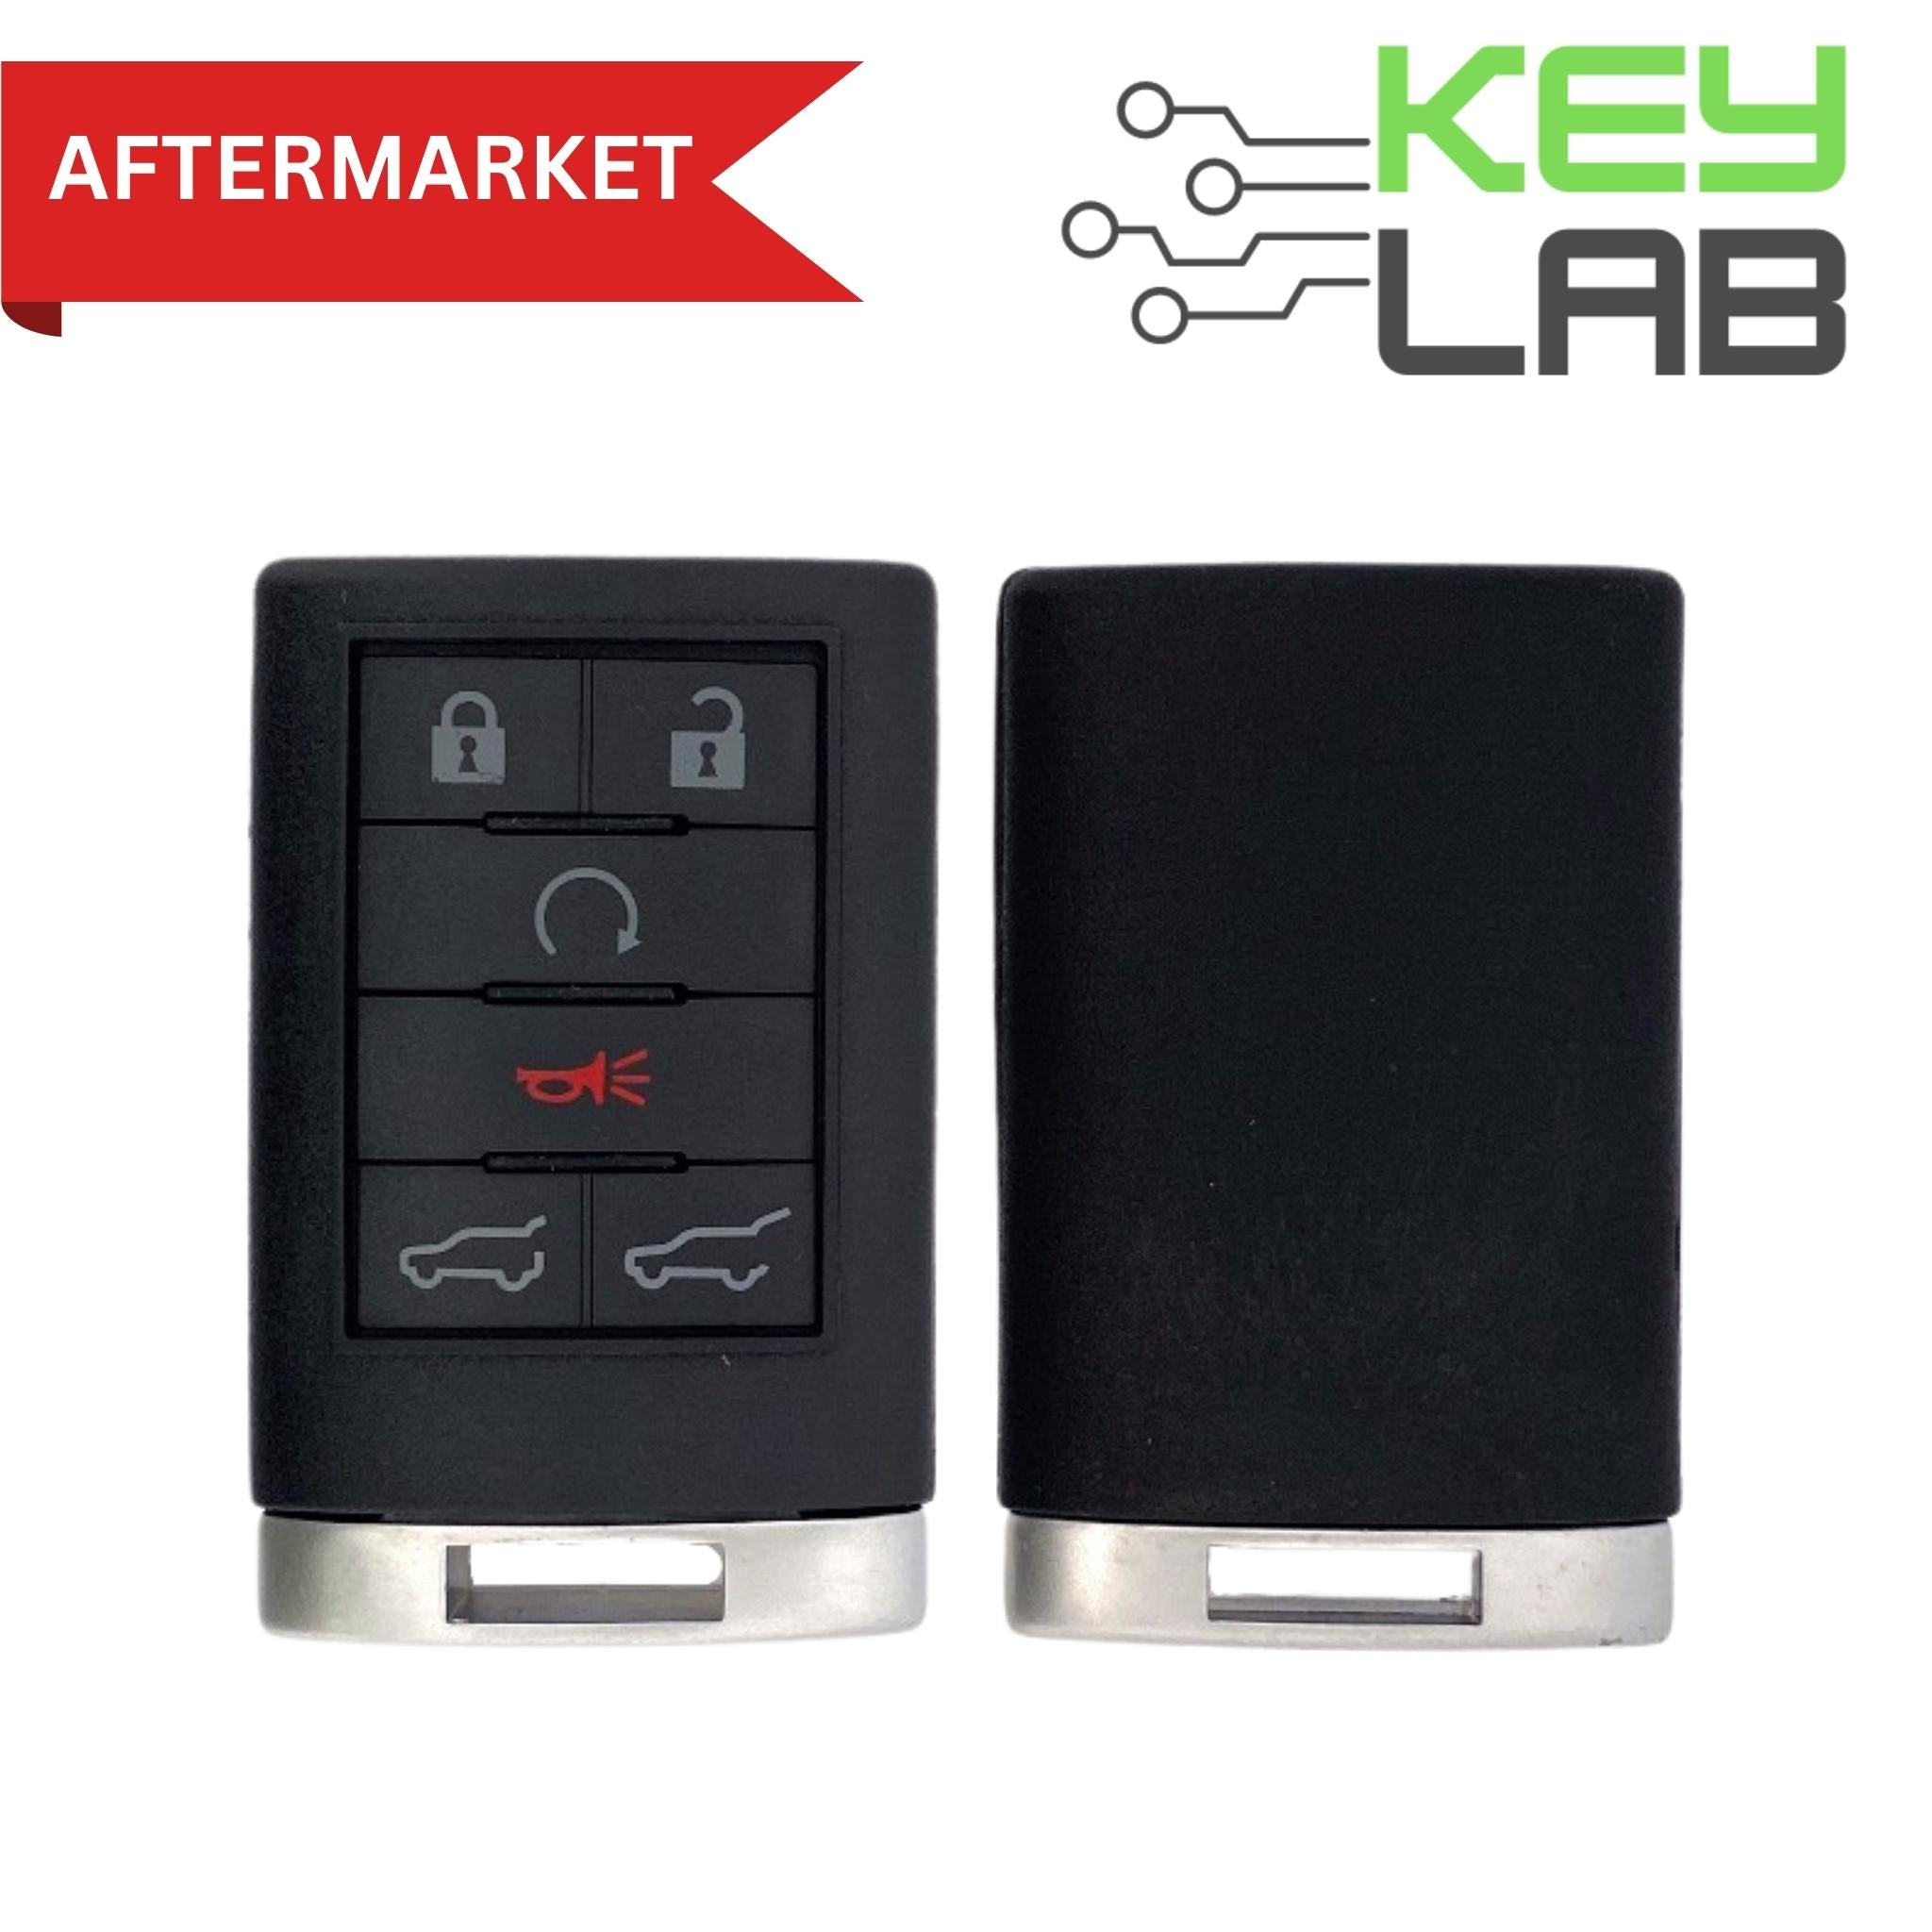 Cadillac Aftermarket 2007-2014 Escalade Keyless Entry Remote 6B Hatch/Glass/Remote Start FCCID: OUC60000223 PN# 5923887